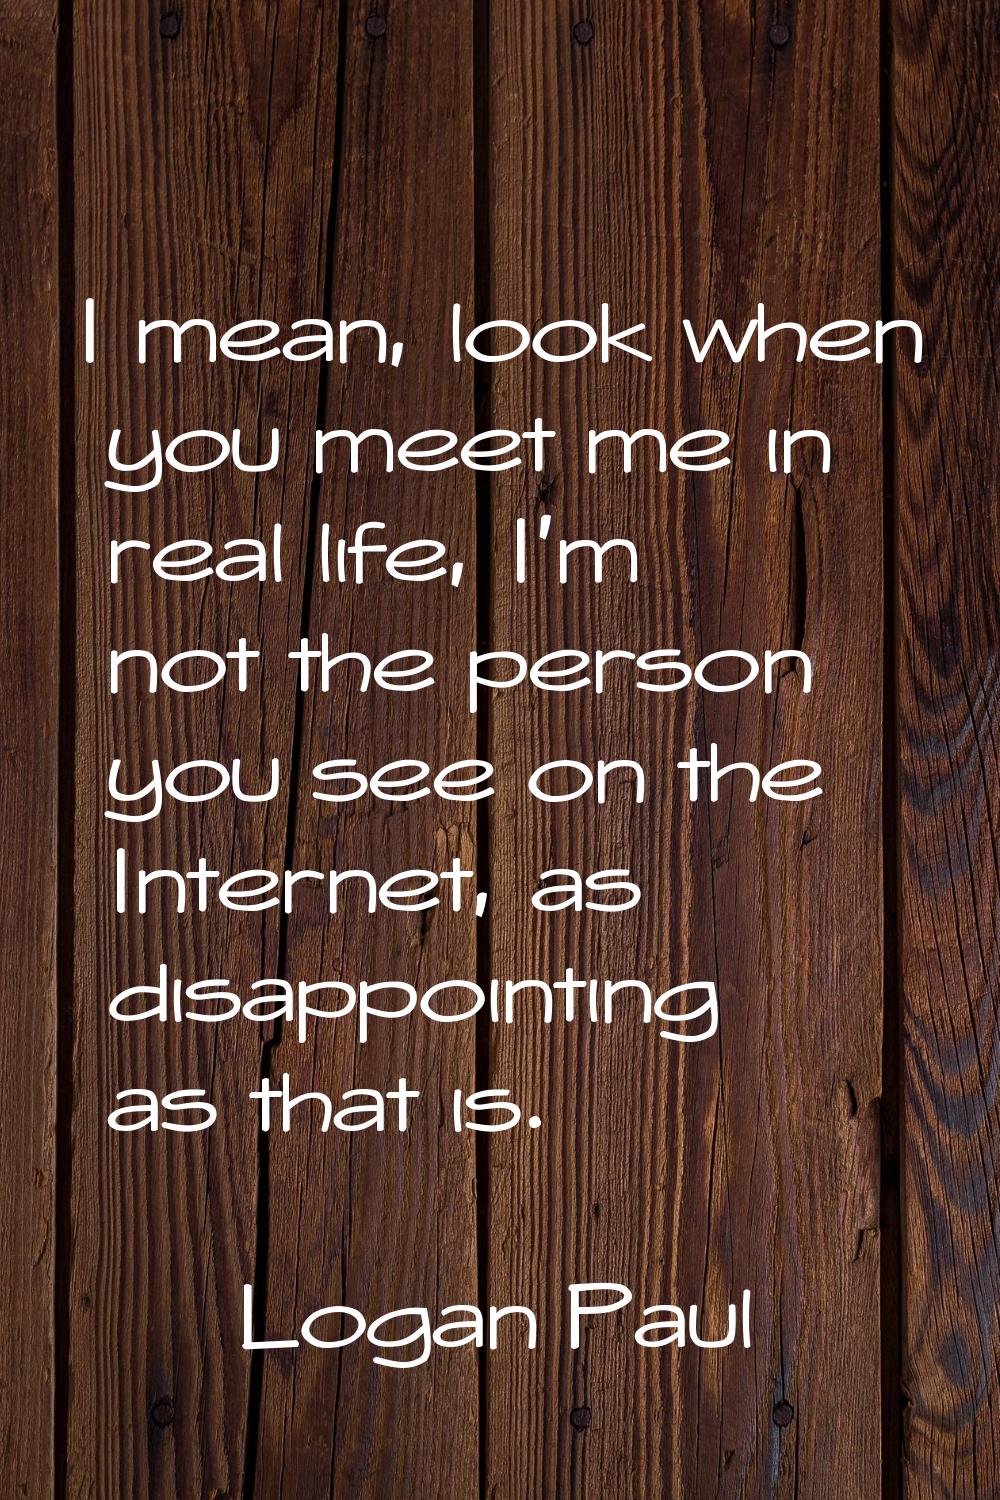 I mean, look when you meet me in real life, I'm not the person you see on the Internet, as disappoi